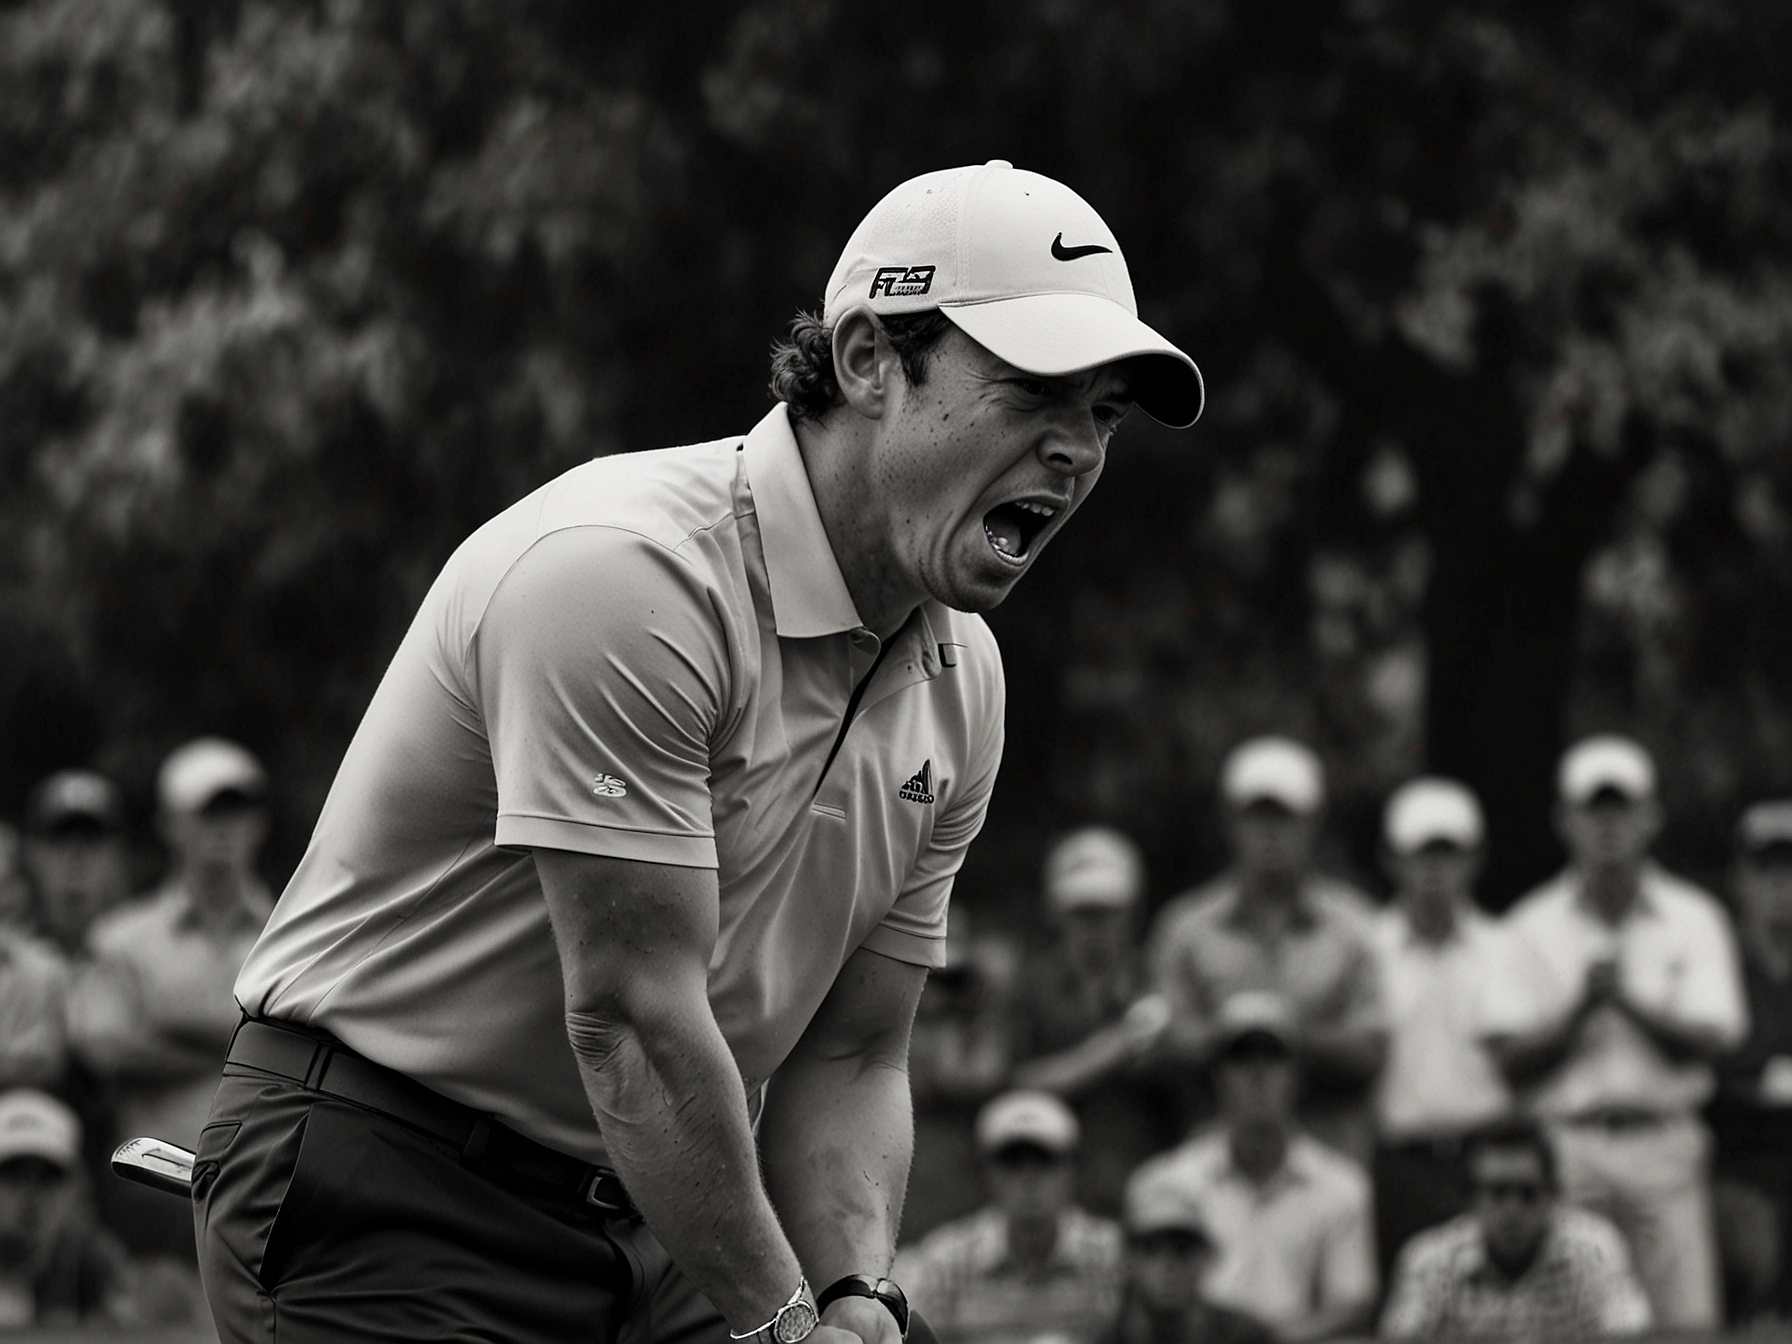 Rory McIlroy reacts with frustration during the final round of the U.S. Open at Winged Foot. His struggles and missed putts in the crucial moments highlighted the fine margins of elite golf.